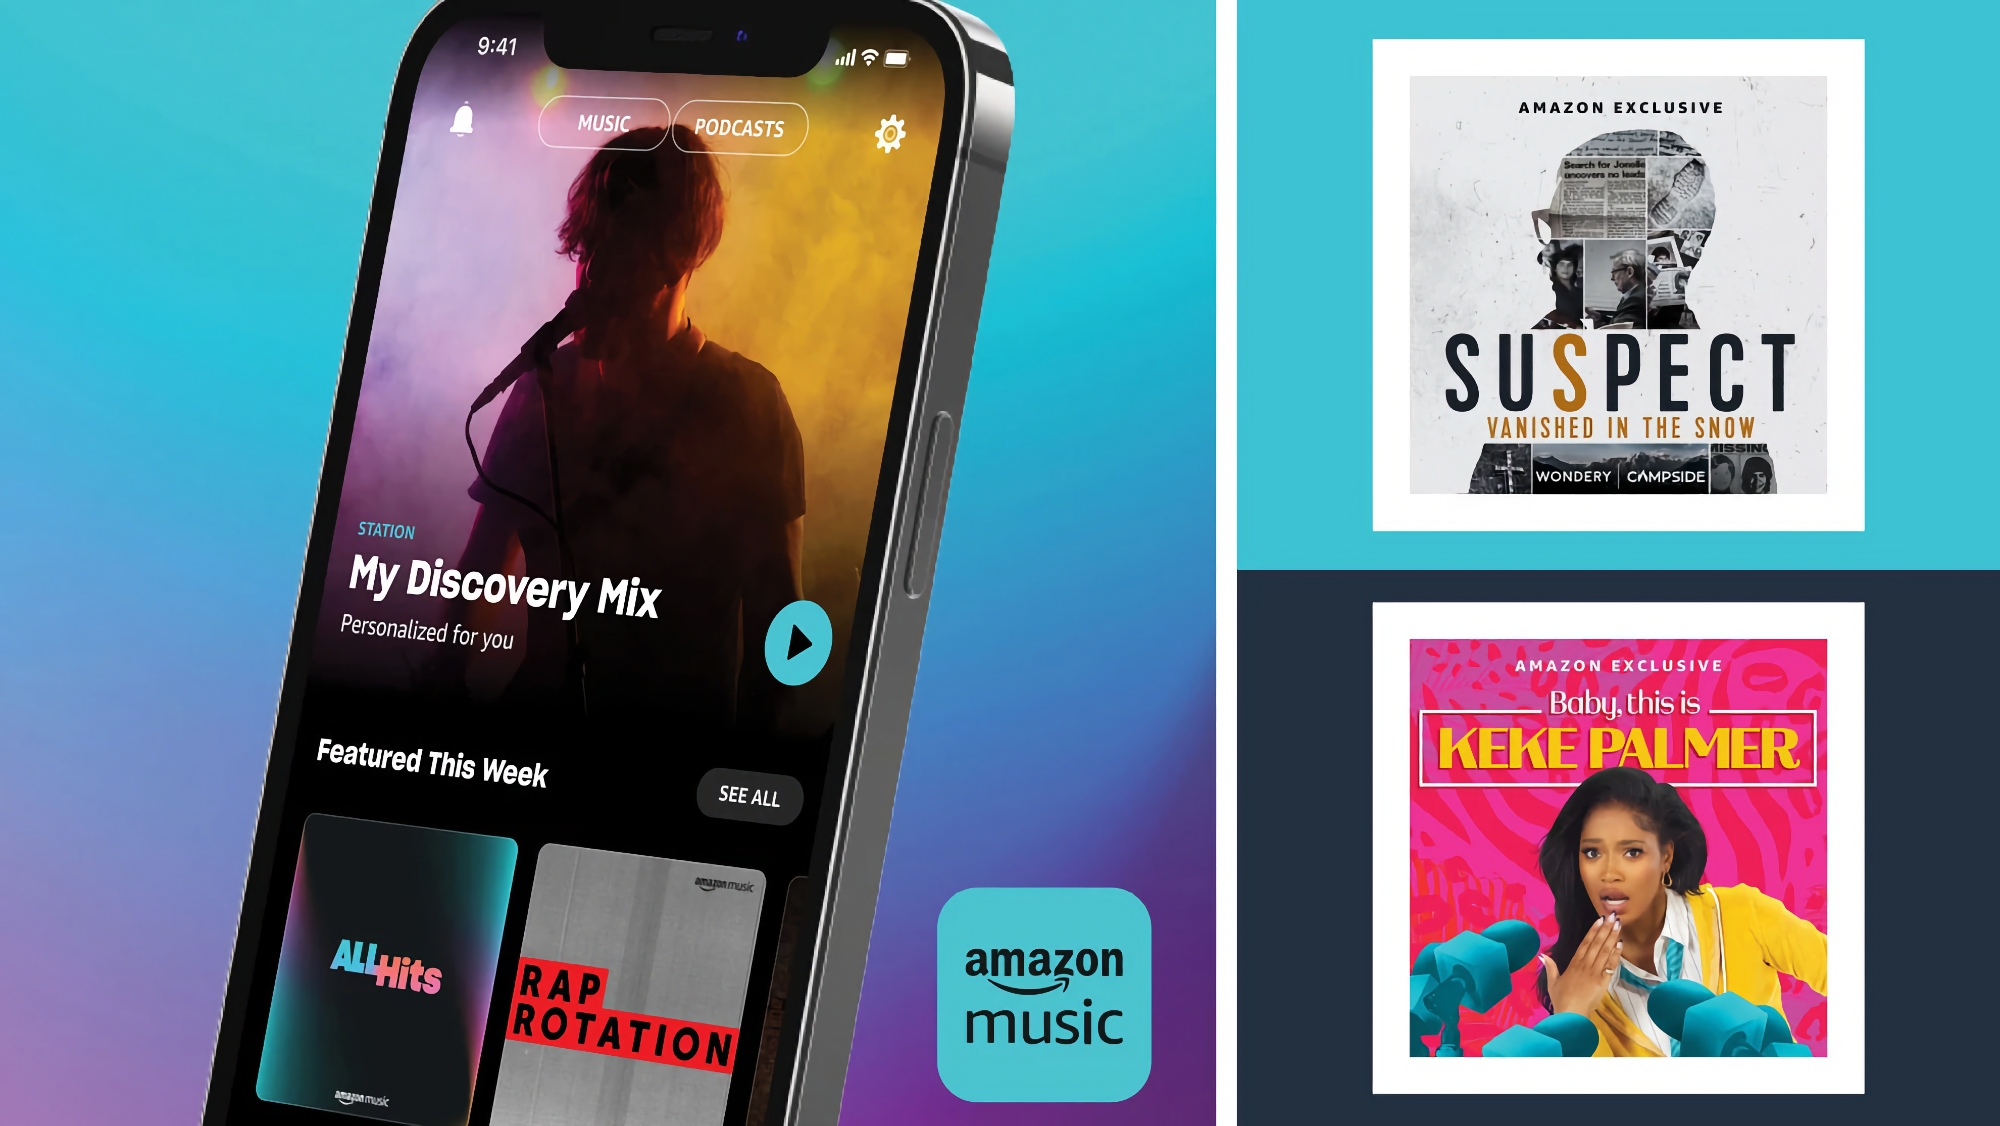 Amazon Prime subscribers get free access to all Amazon Music songs and podcasts